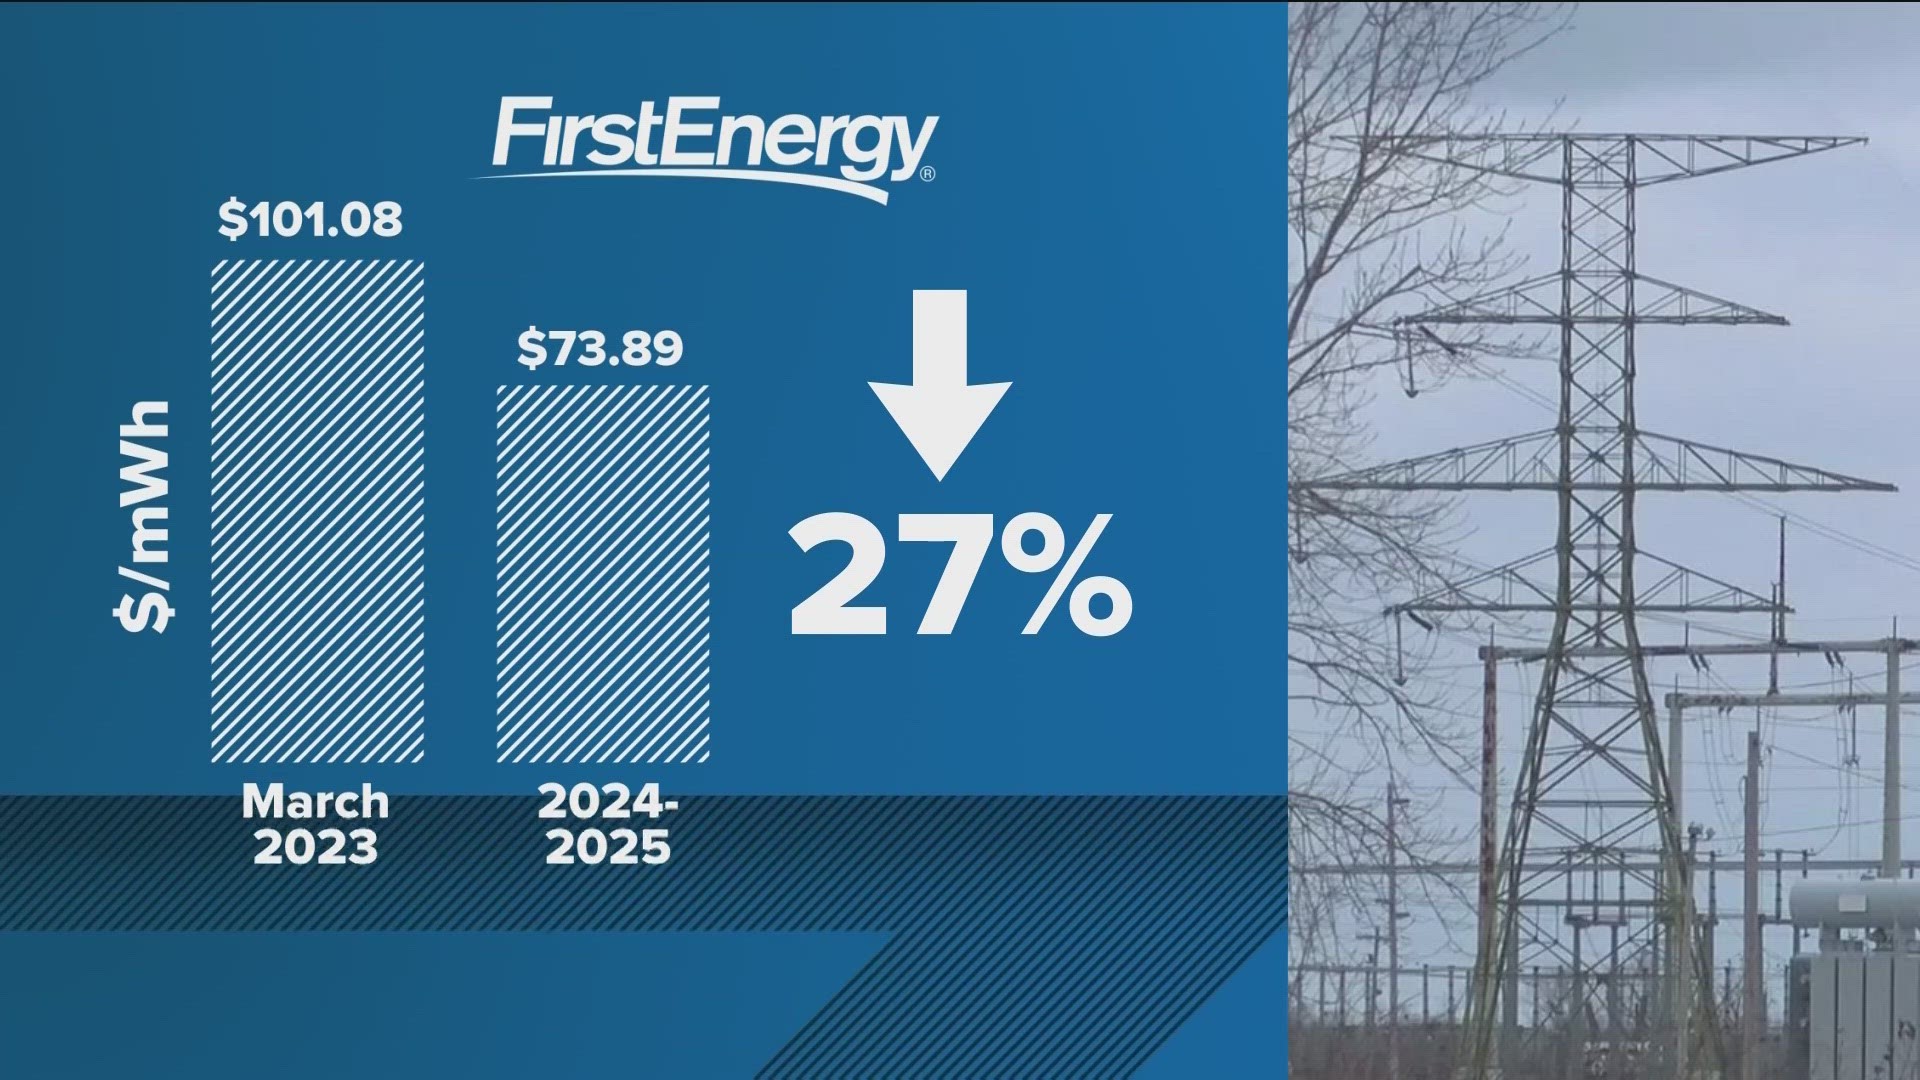 The company is paying about 27% less for electricity at auction this year, according to the Public Utilities Commission of Ohio.